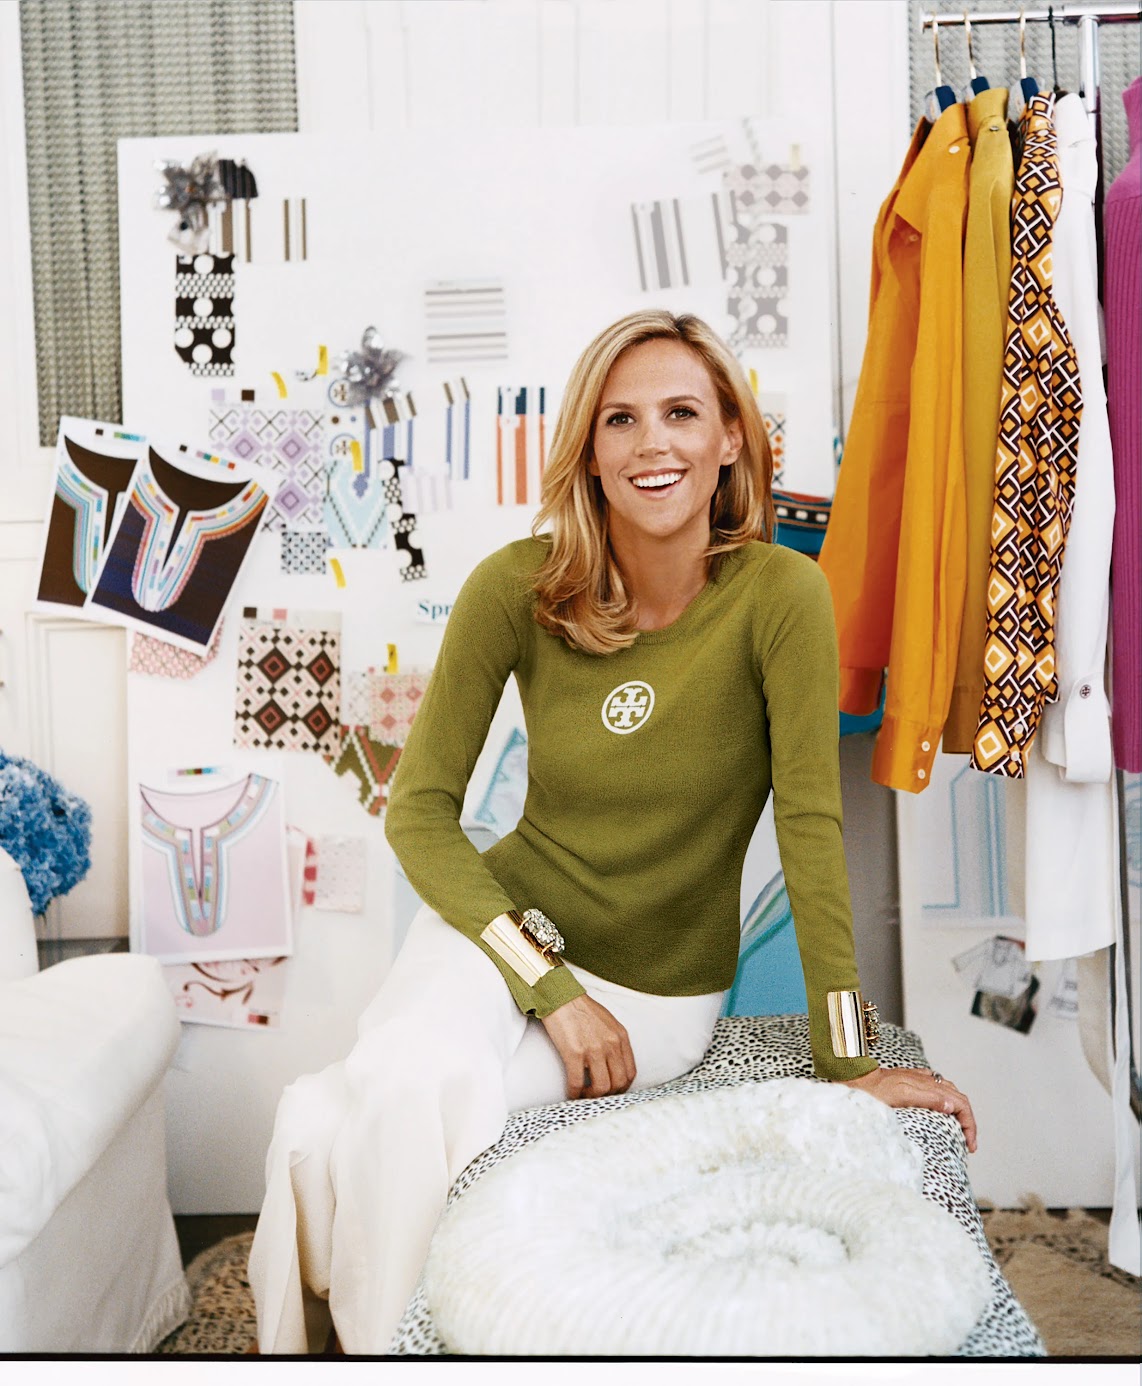 Tory Burch - News, Tips & Guides